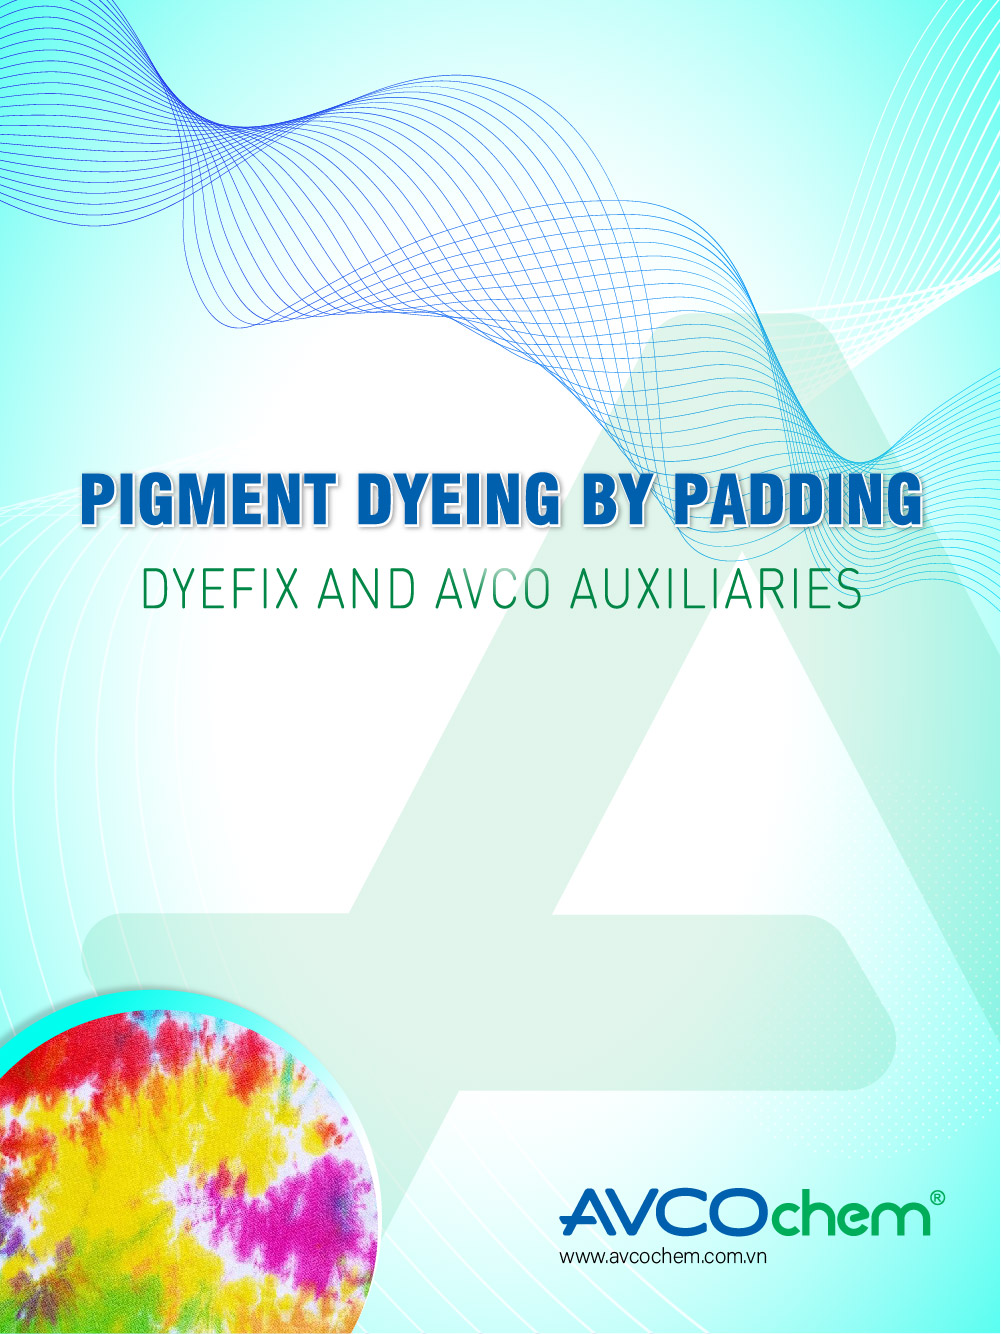 PIGMENT DYEING BY PADDING